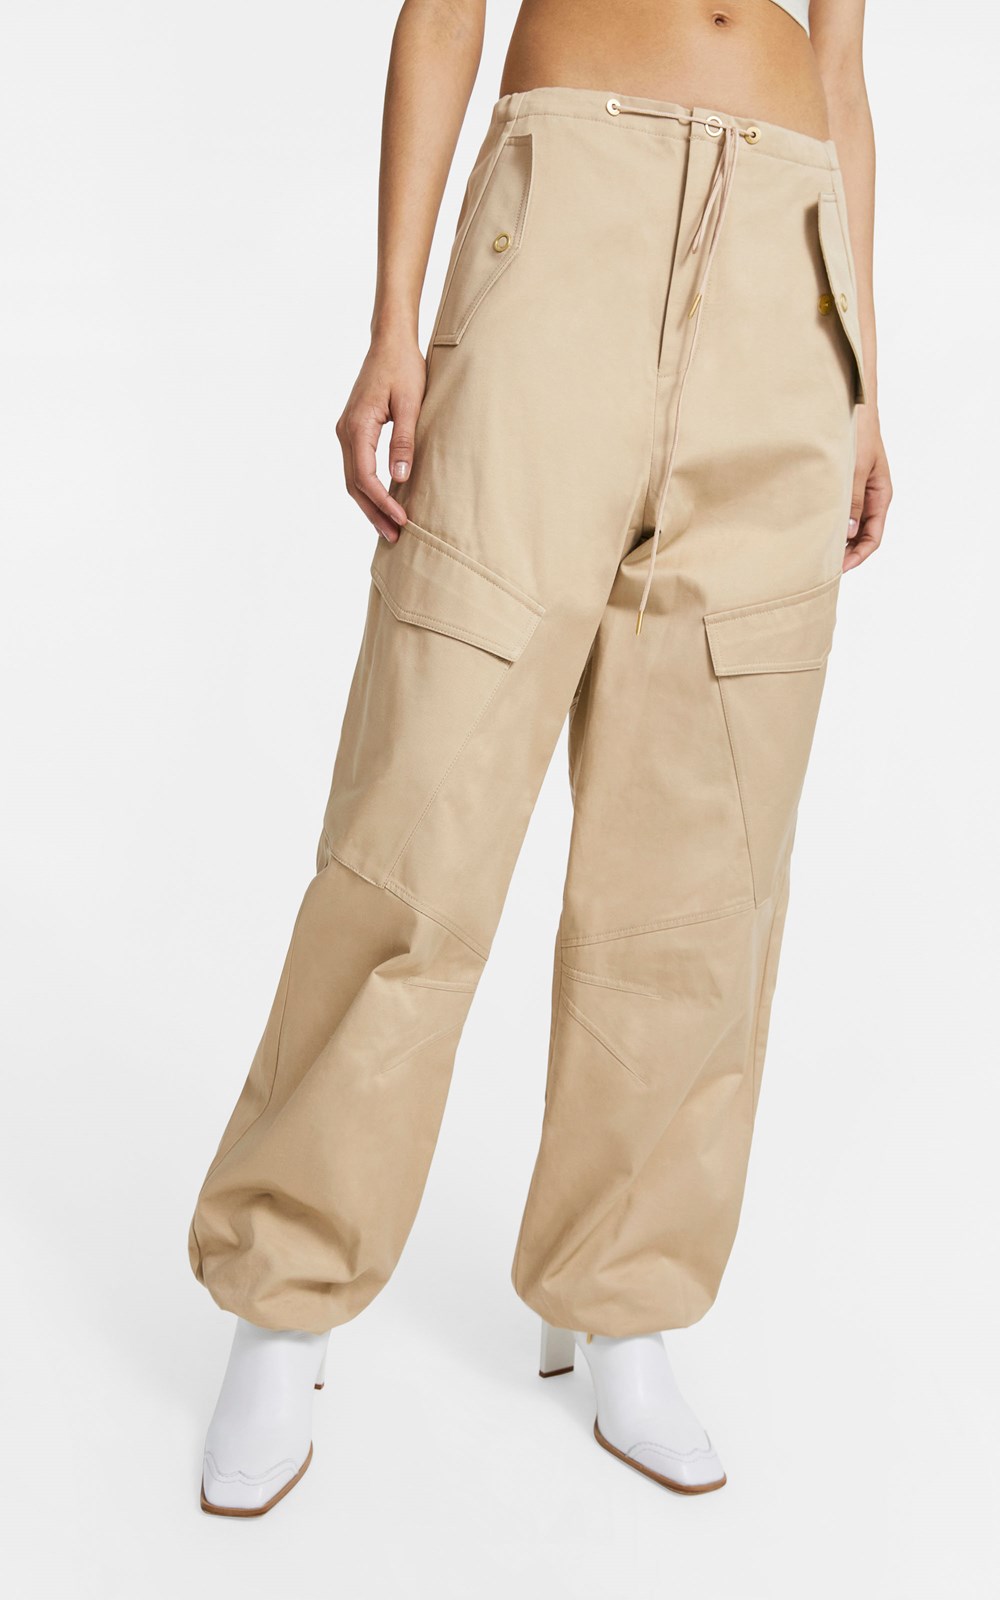 PARACHUTE CARGO PANT by Dion Lee